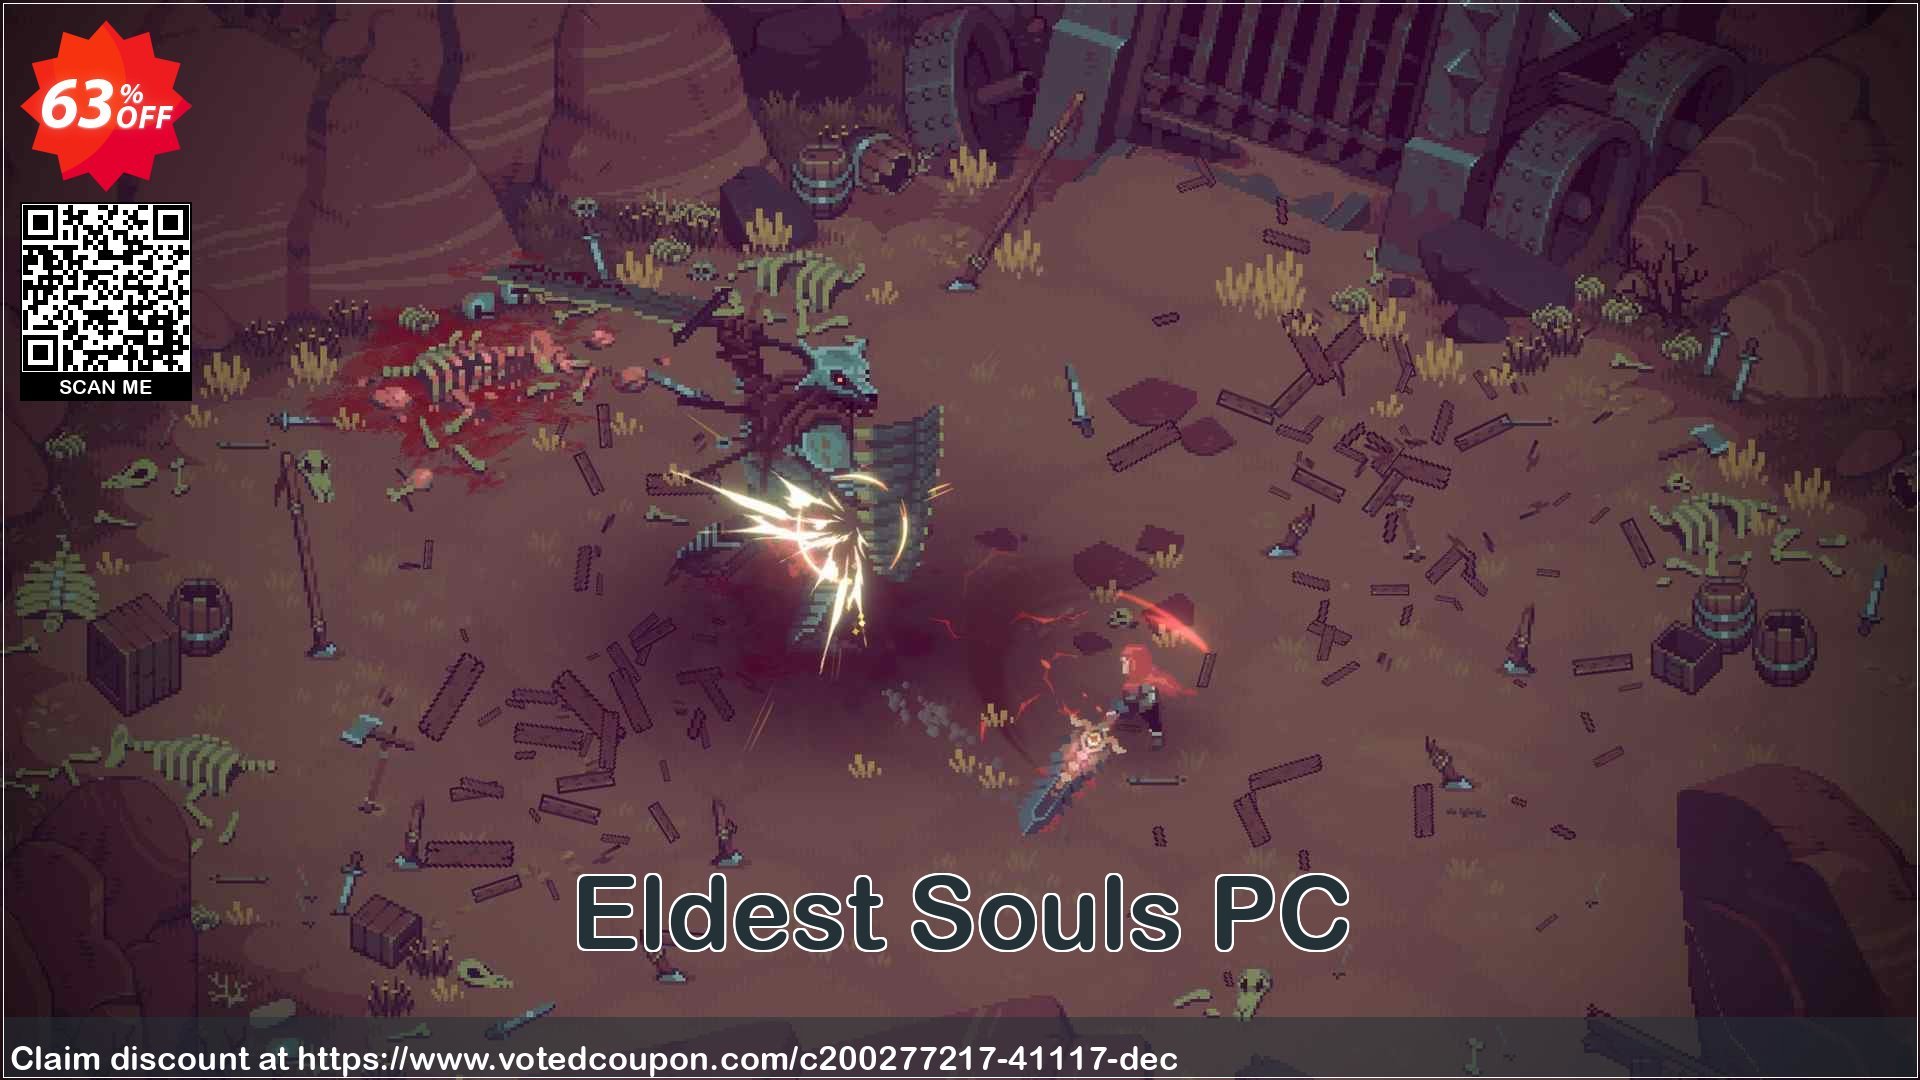 Eldest Souls PC Coupon Code May 2024, 63% OFF - VotedCoupon